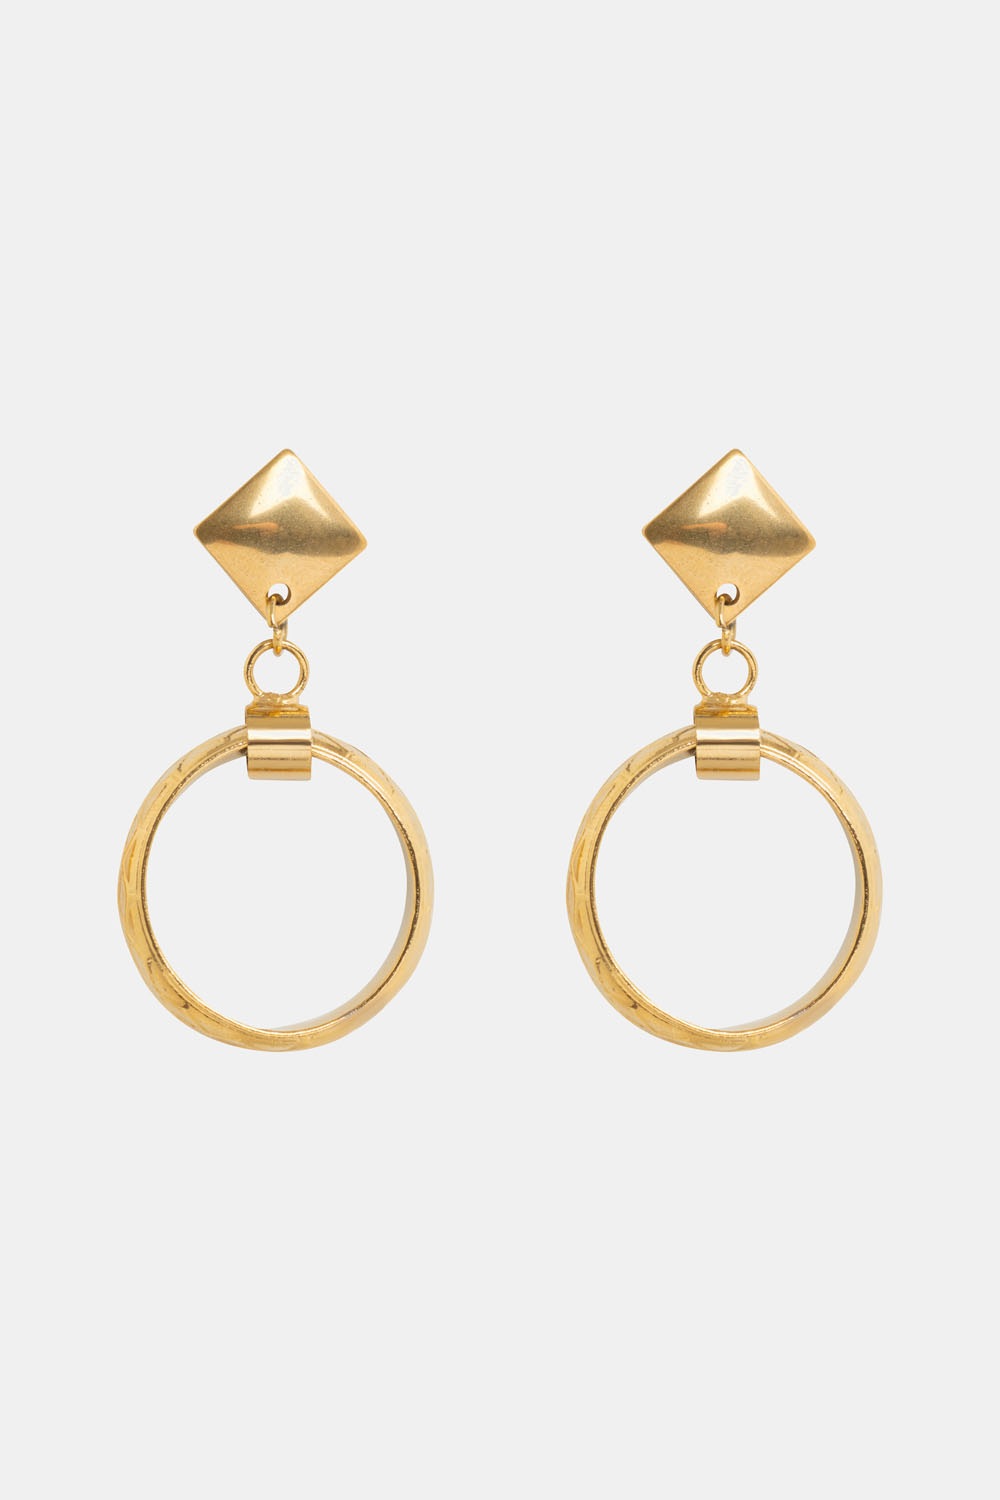 Retro Gold Hoops With Engraving | Vintage Inspired Fashion ...